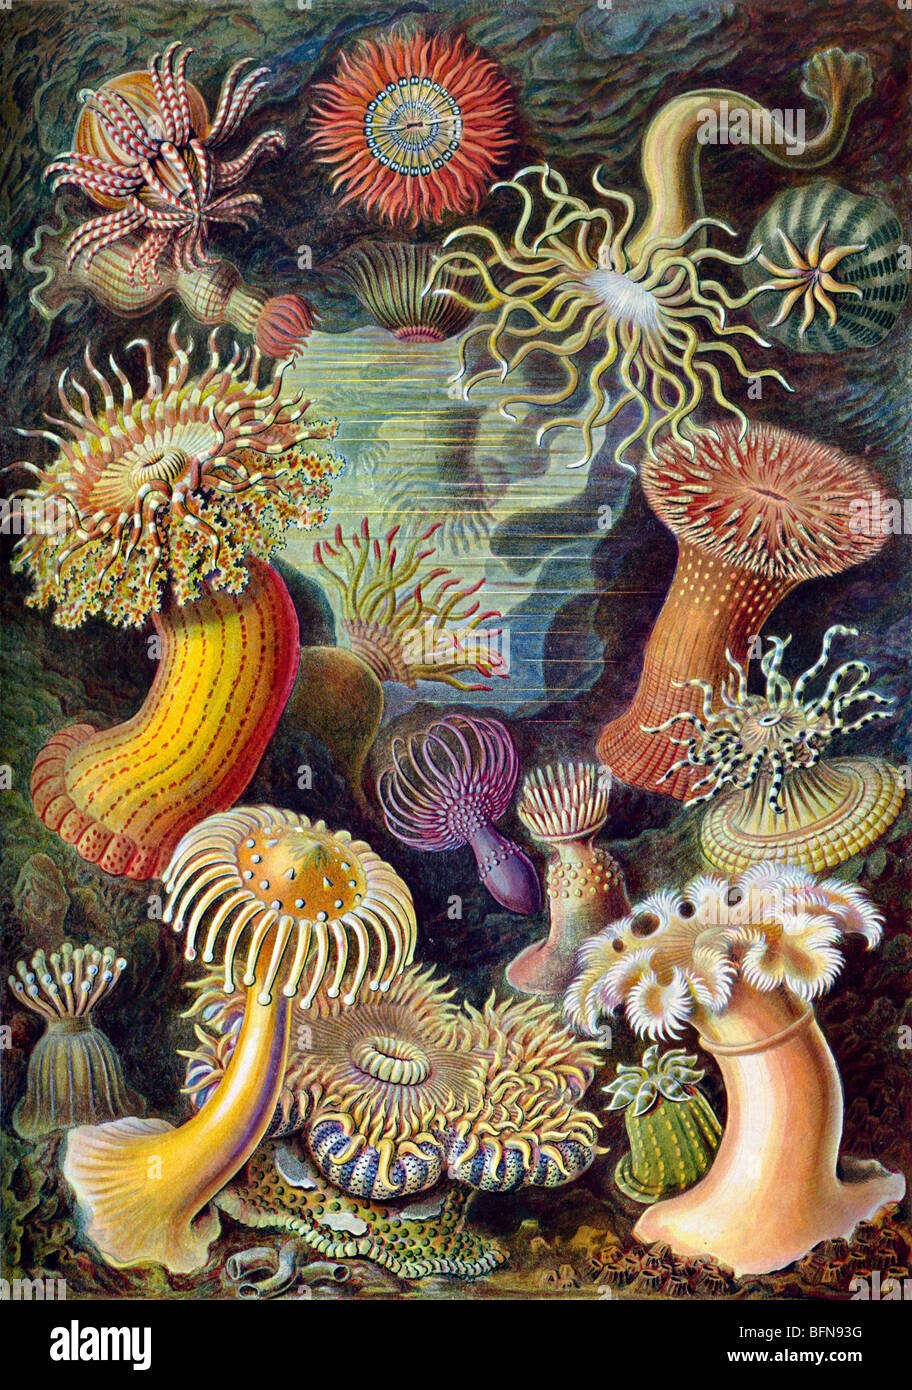 The 49th plate from Ernst Haeckel's Kunstformen der Natur of 1904, showing various sea anemones classified as Actiniae Stock Photo